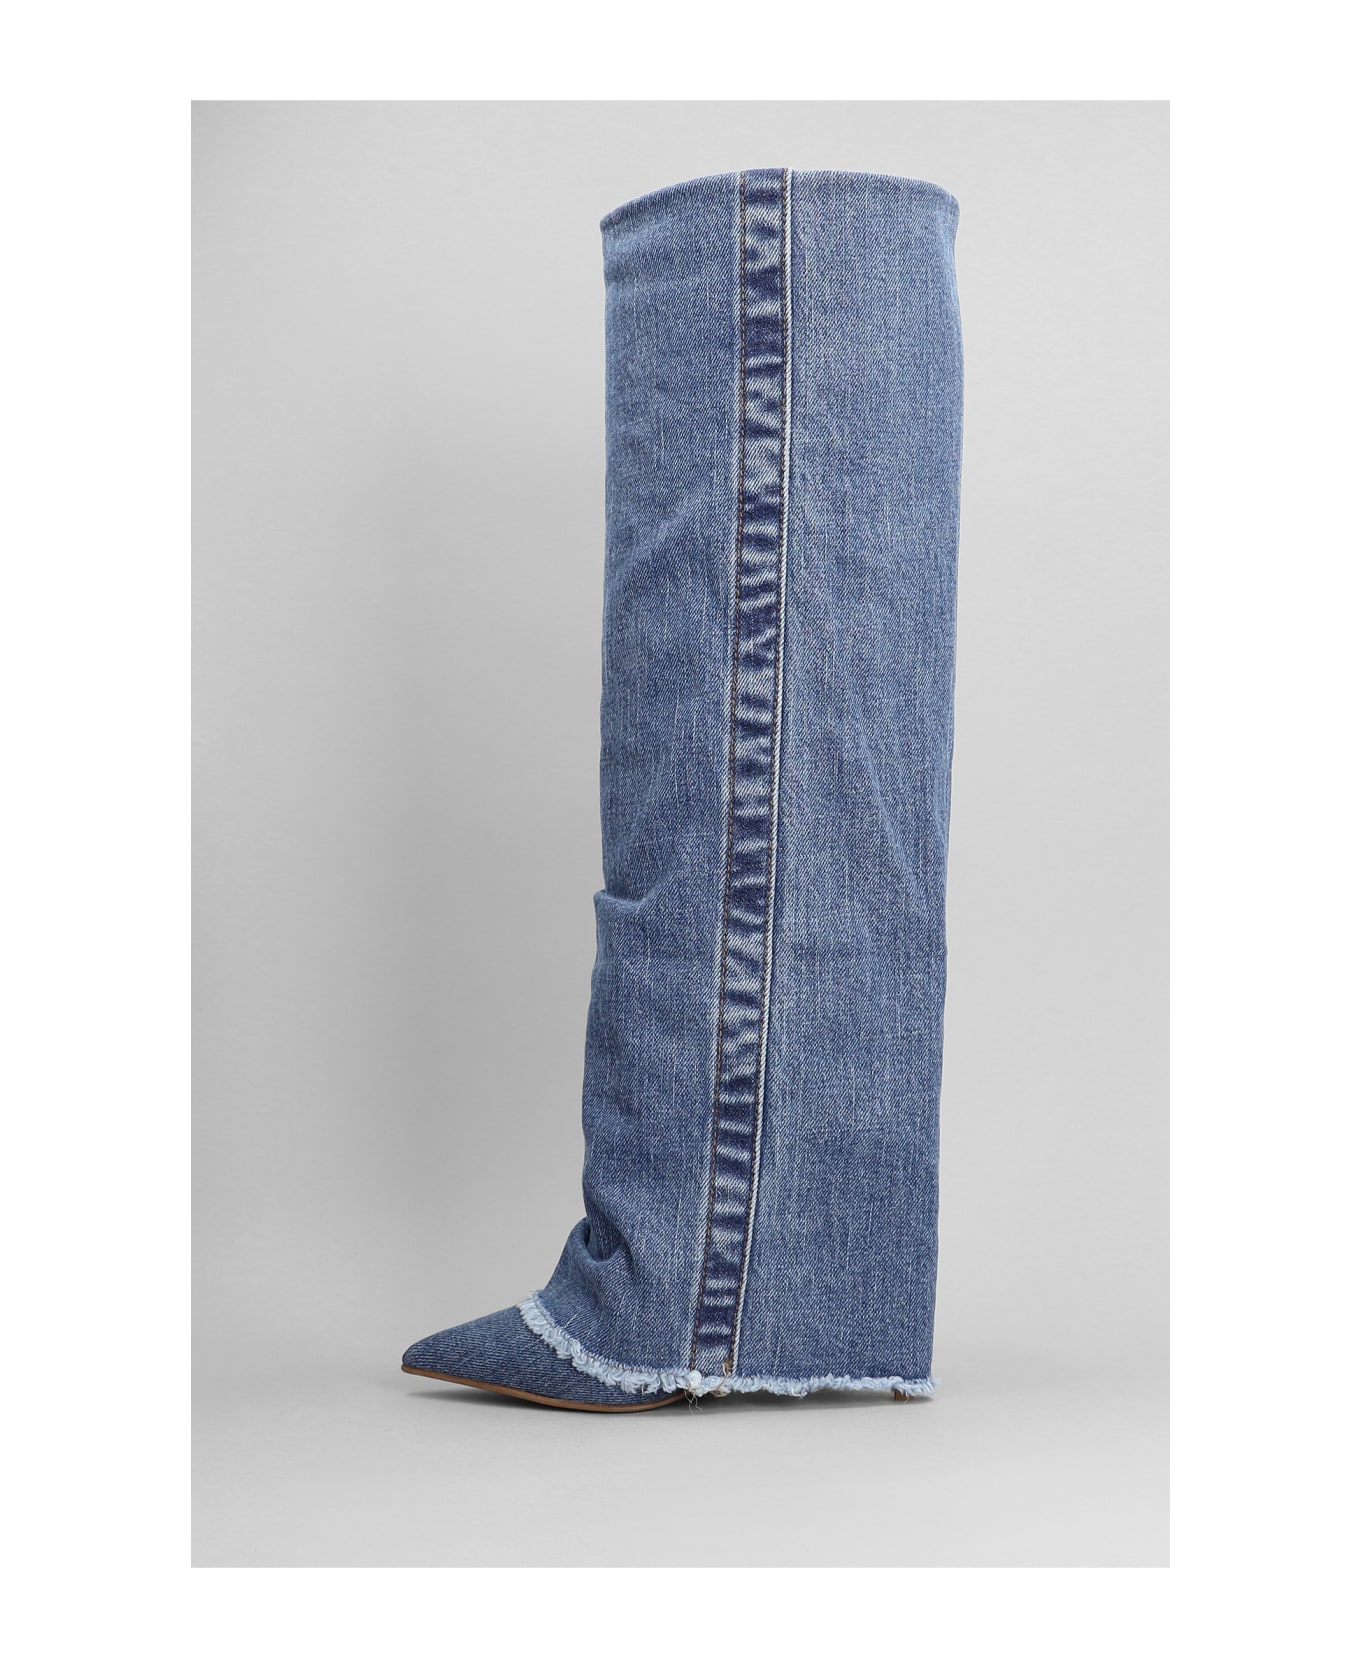 Le Silla Andy 120 High Heels Boots In Blue Denim - blue